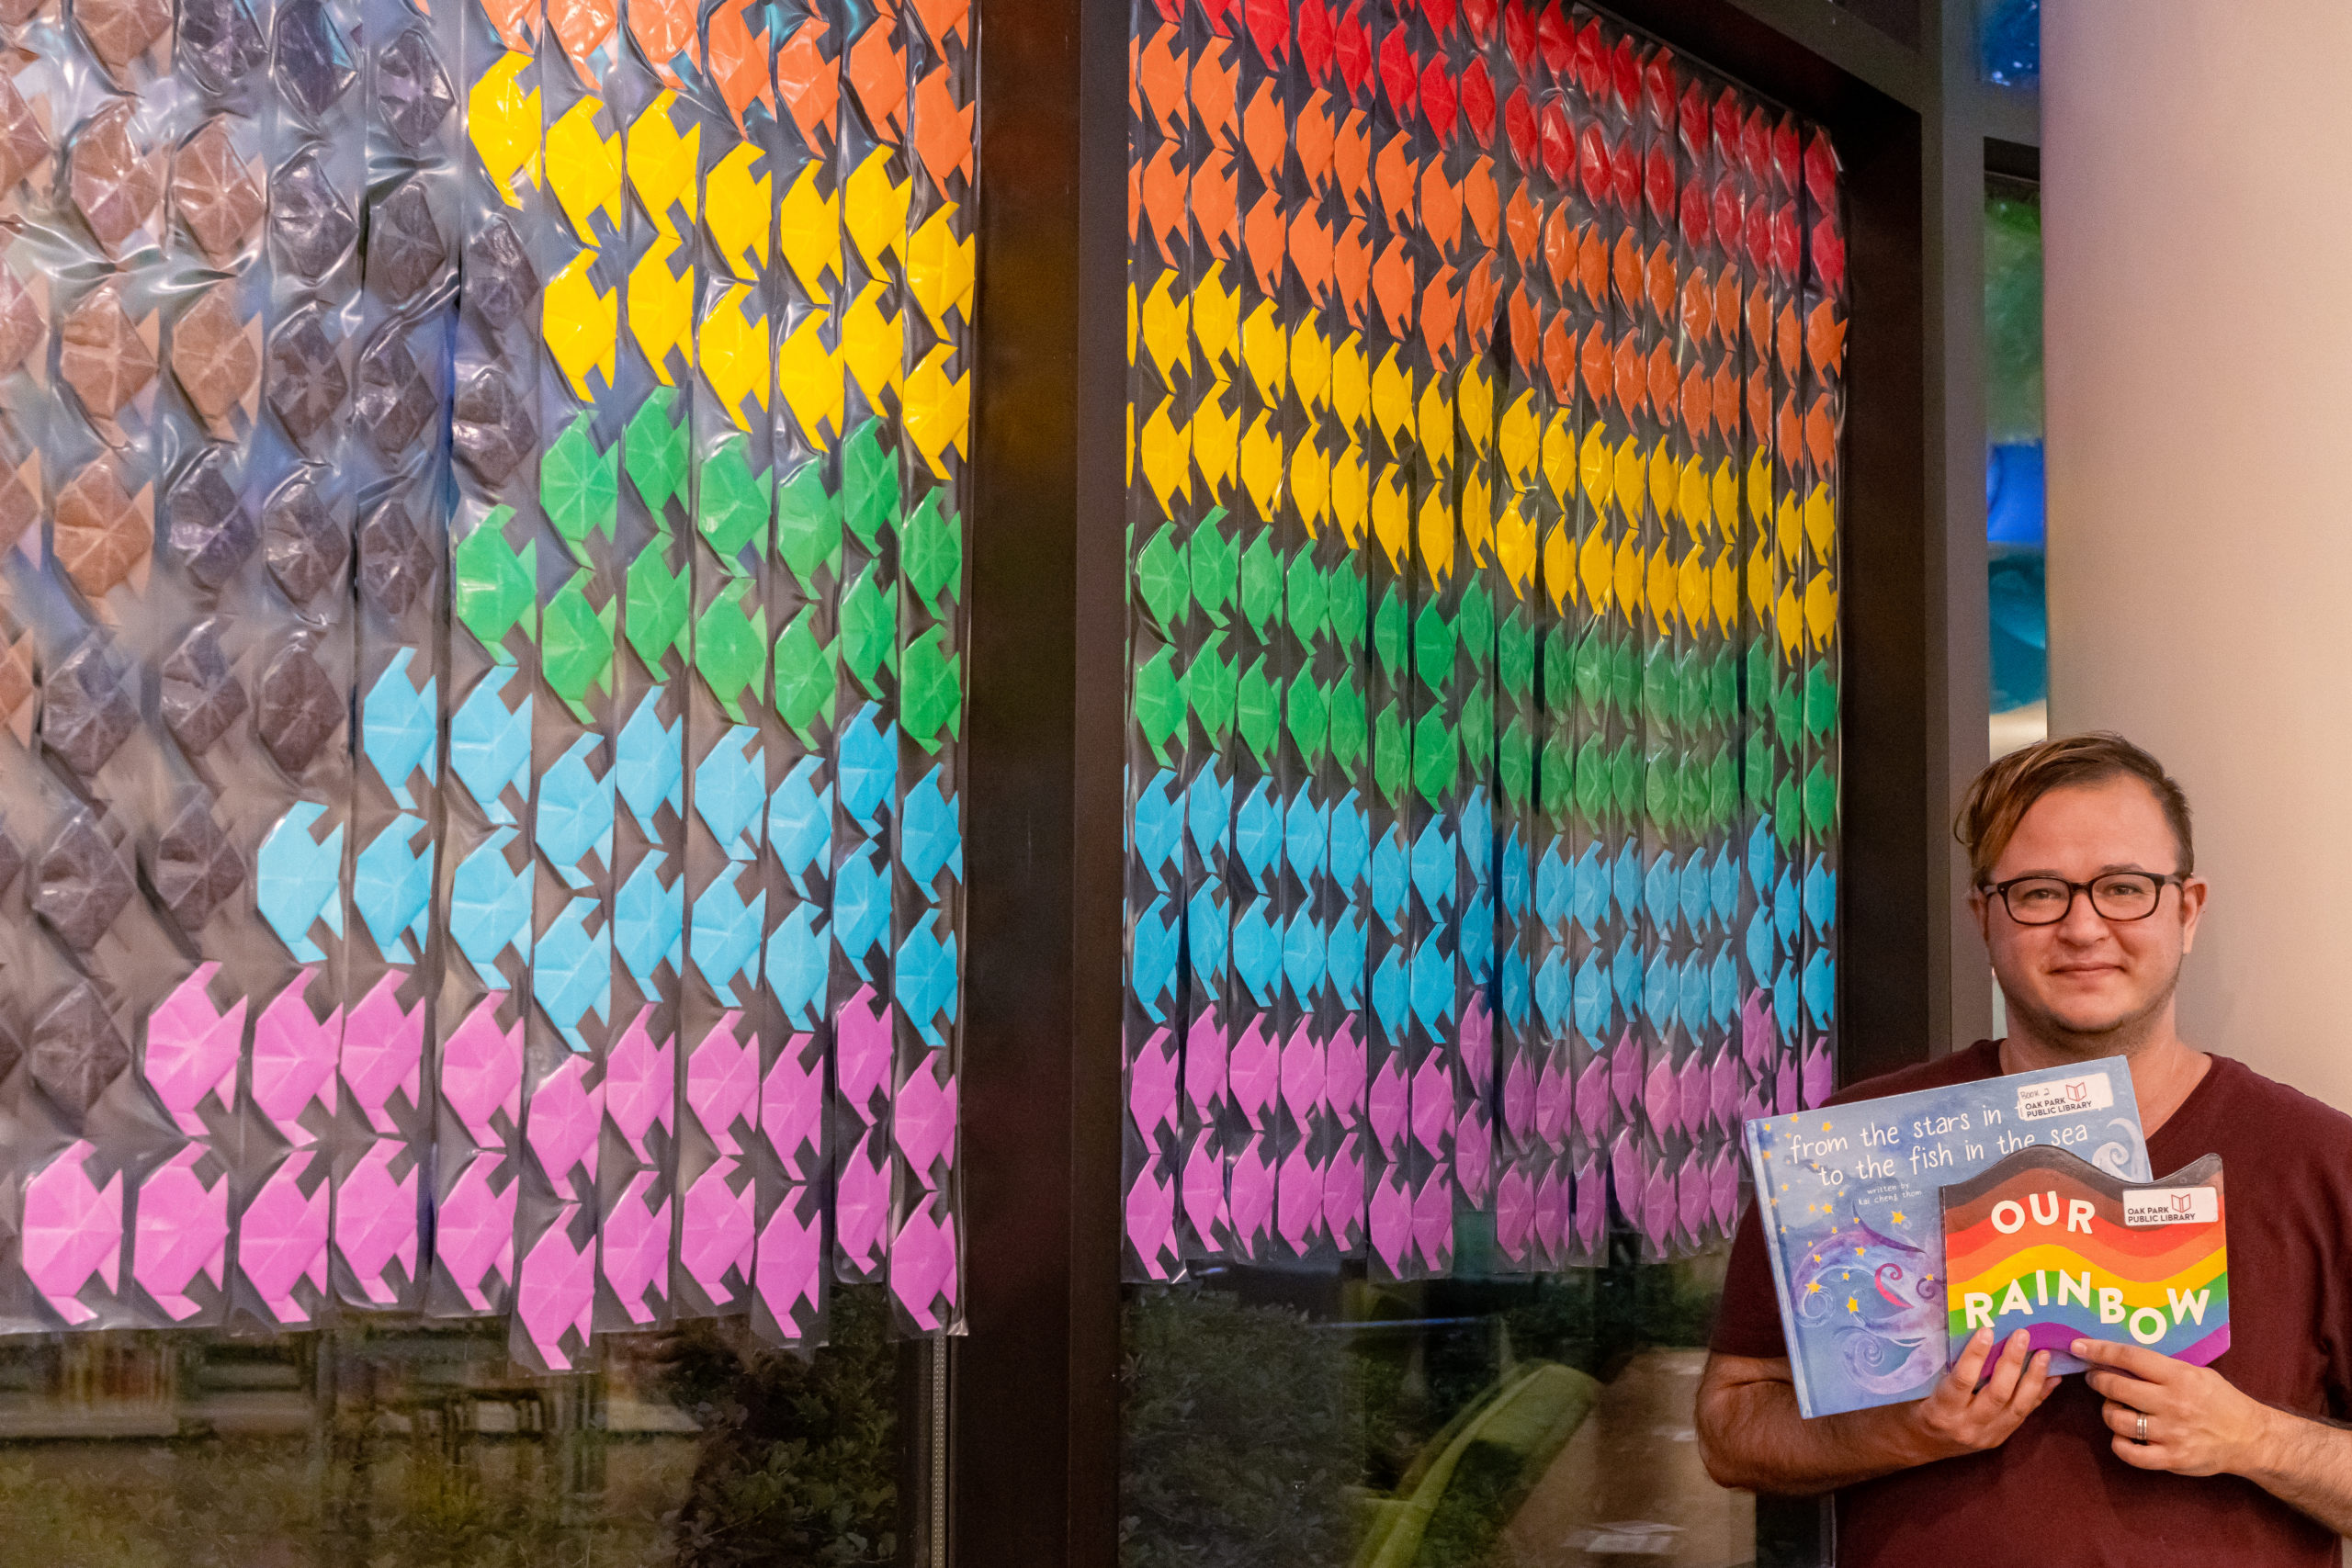 A person with glasses stands in front of a wall of rainbow fish.